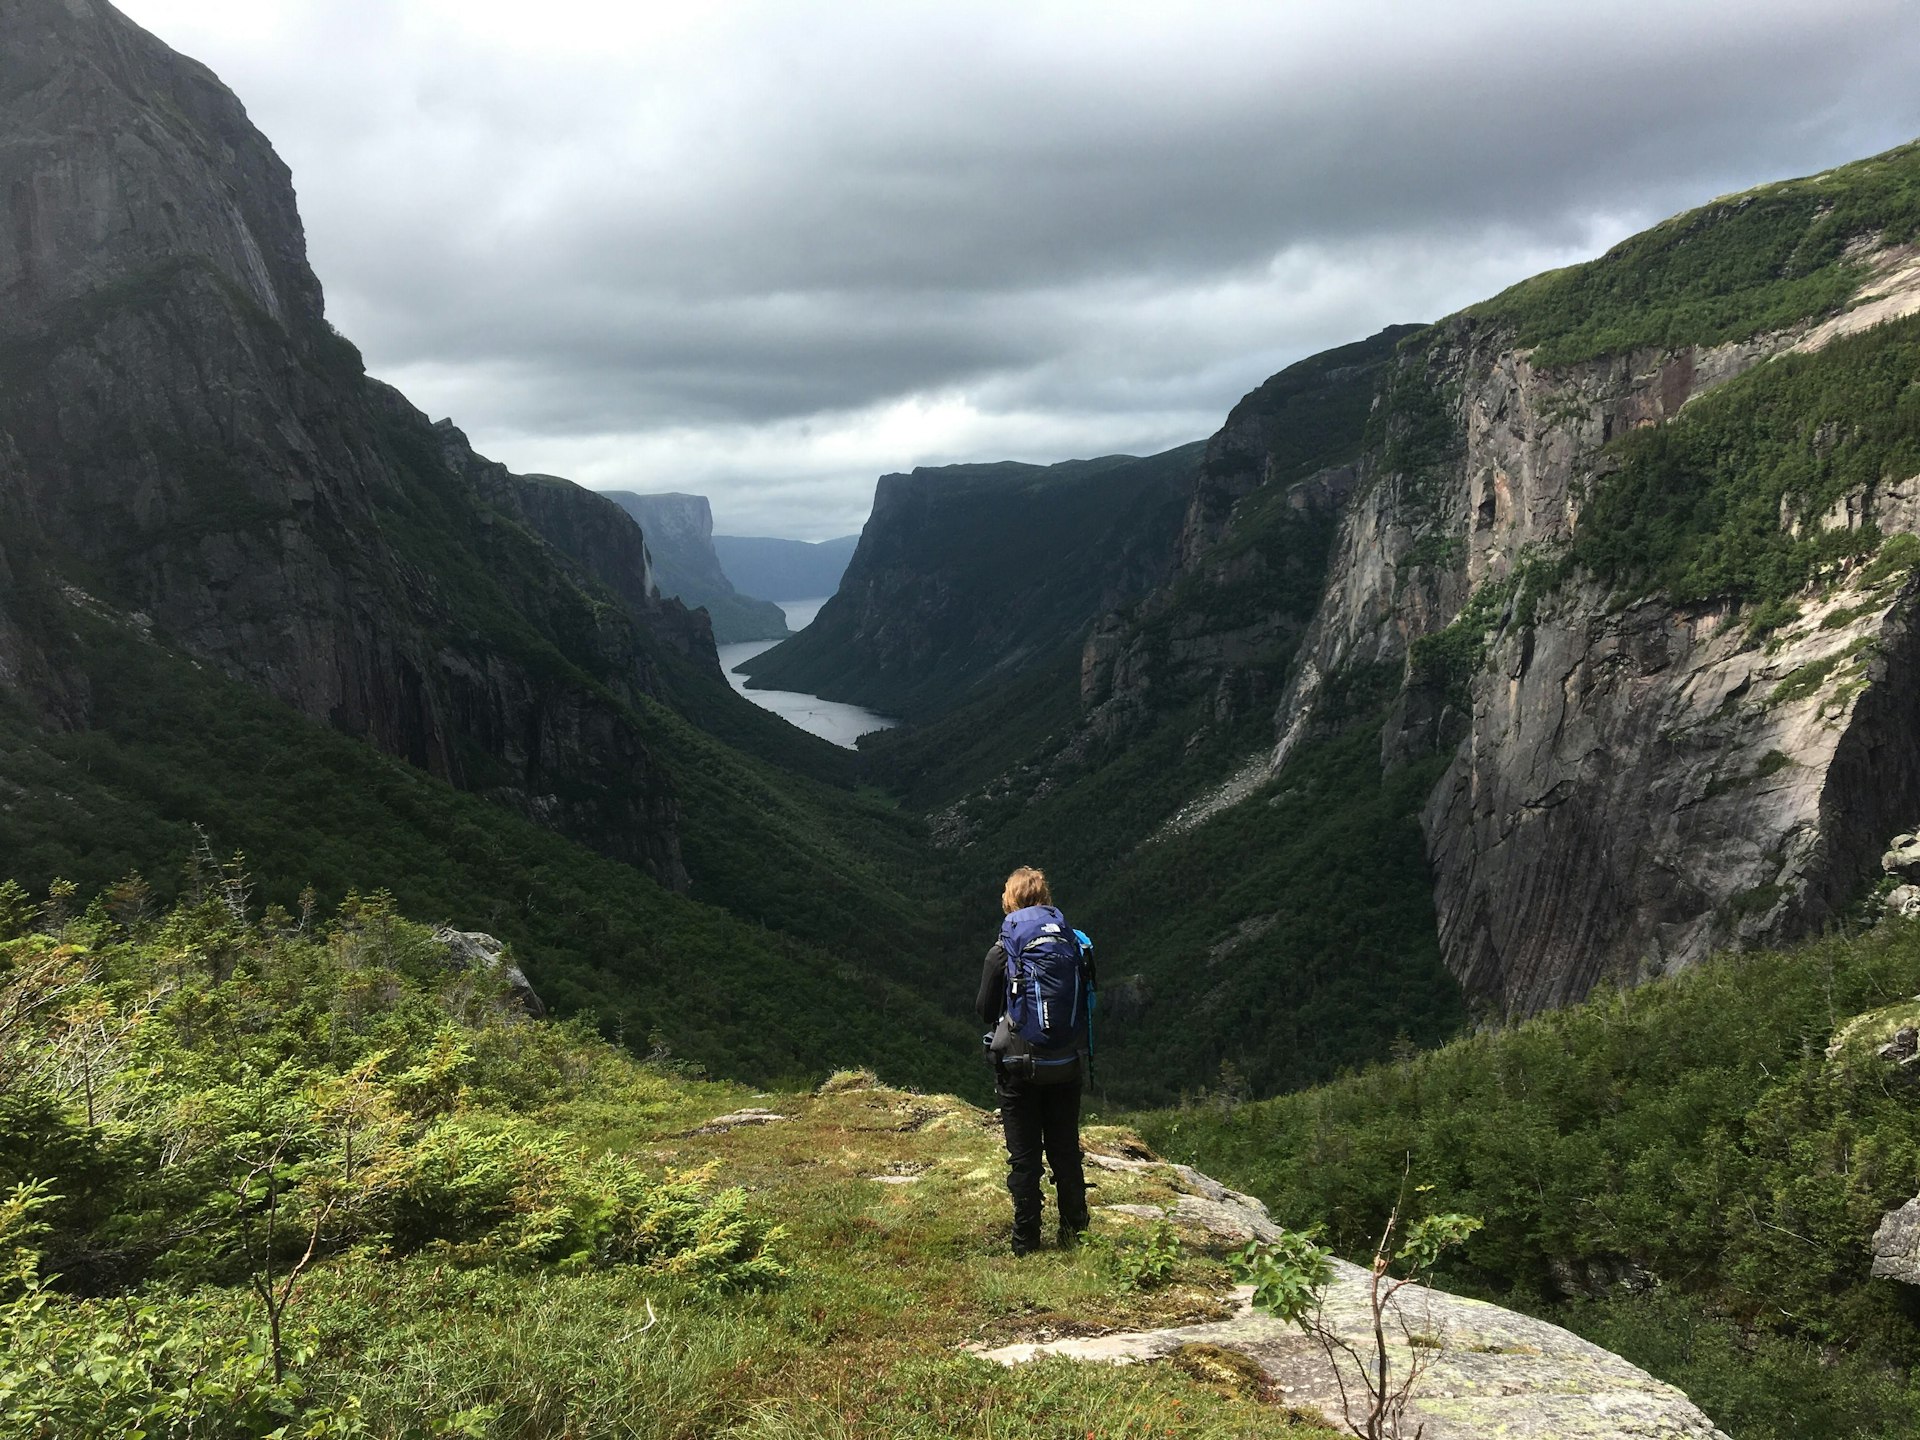 A woman wearing a backpack stands at the head of a spectacular fjord with her back to the camera in Gros Mourne National Park, gazing at the view ahead.